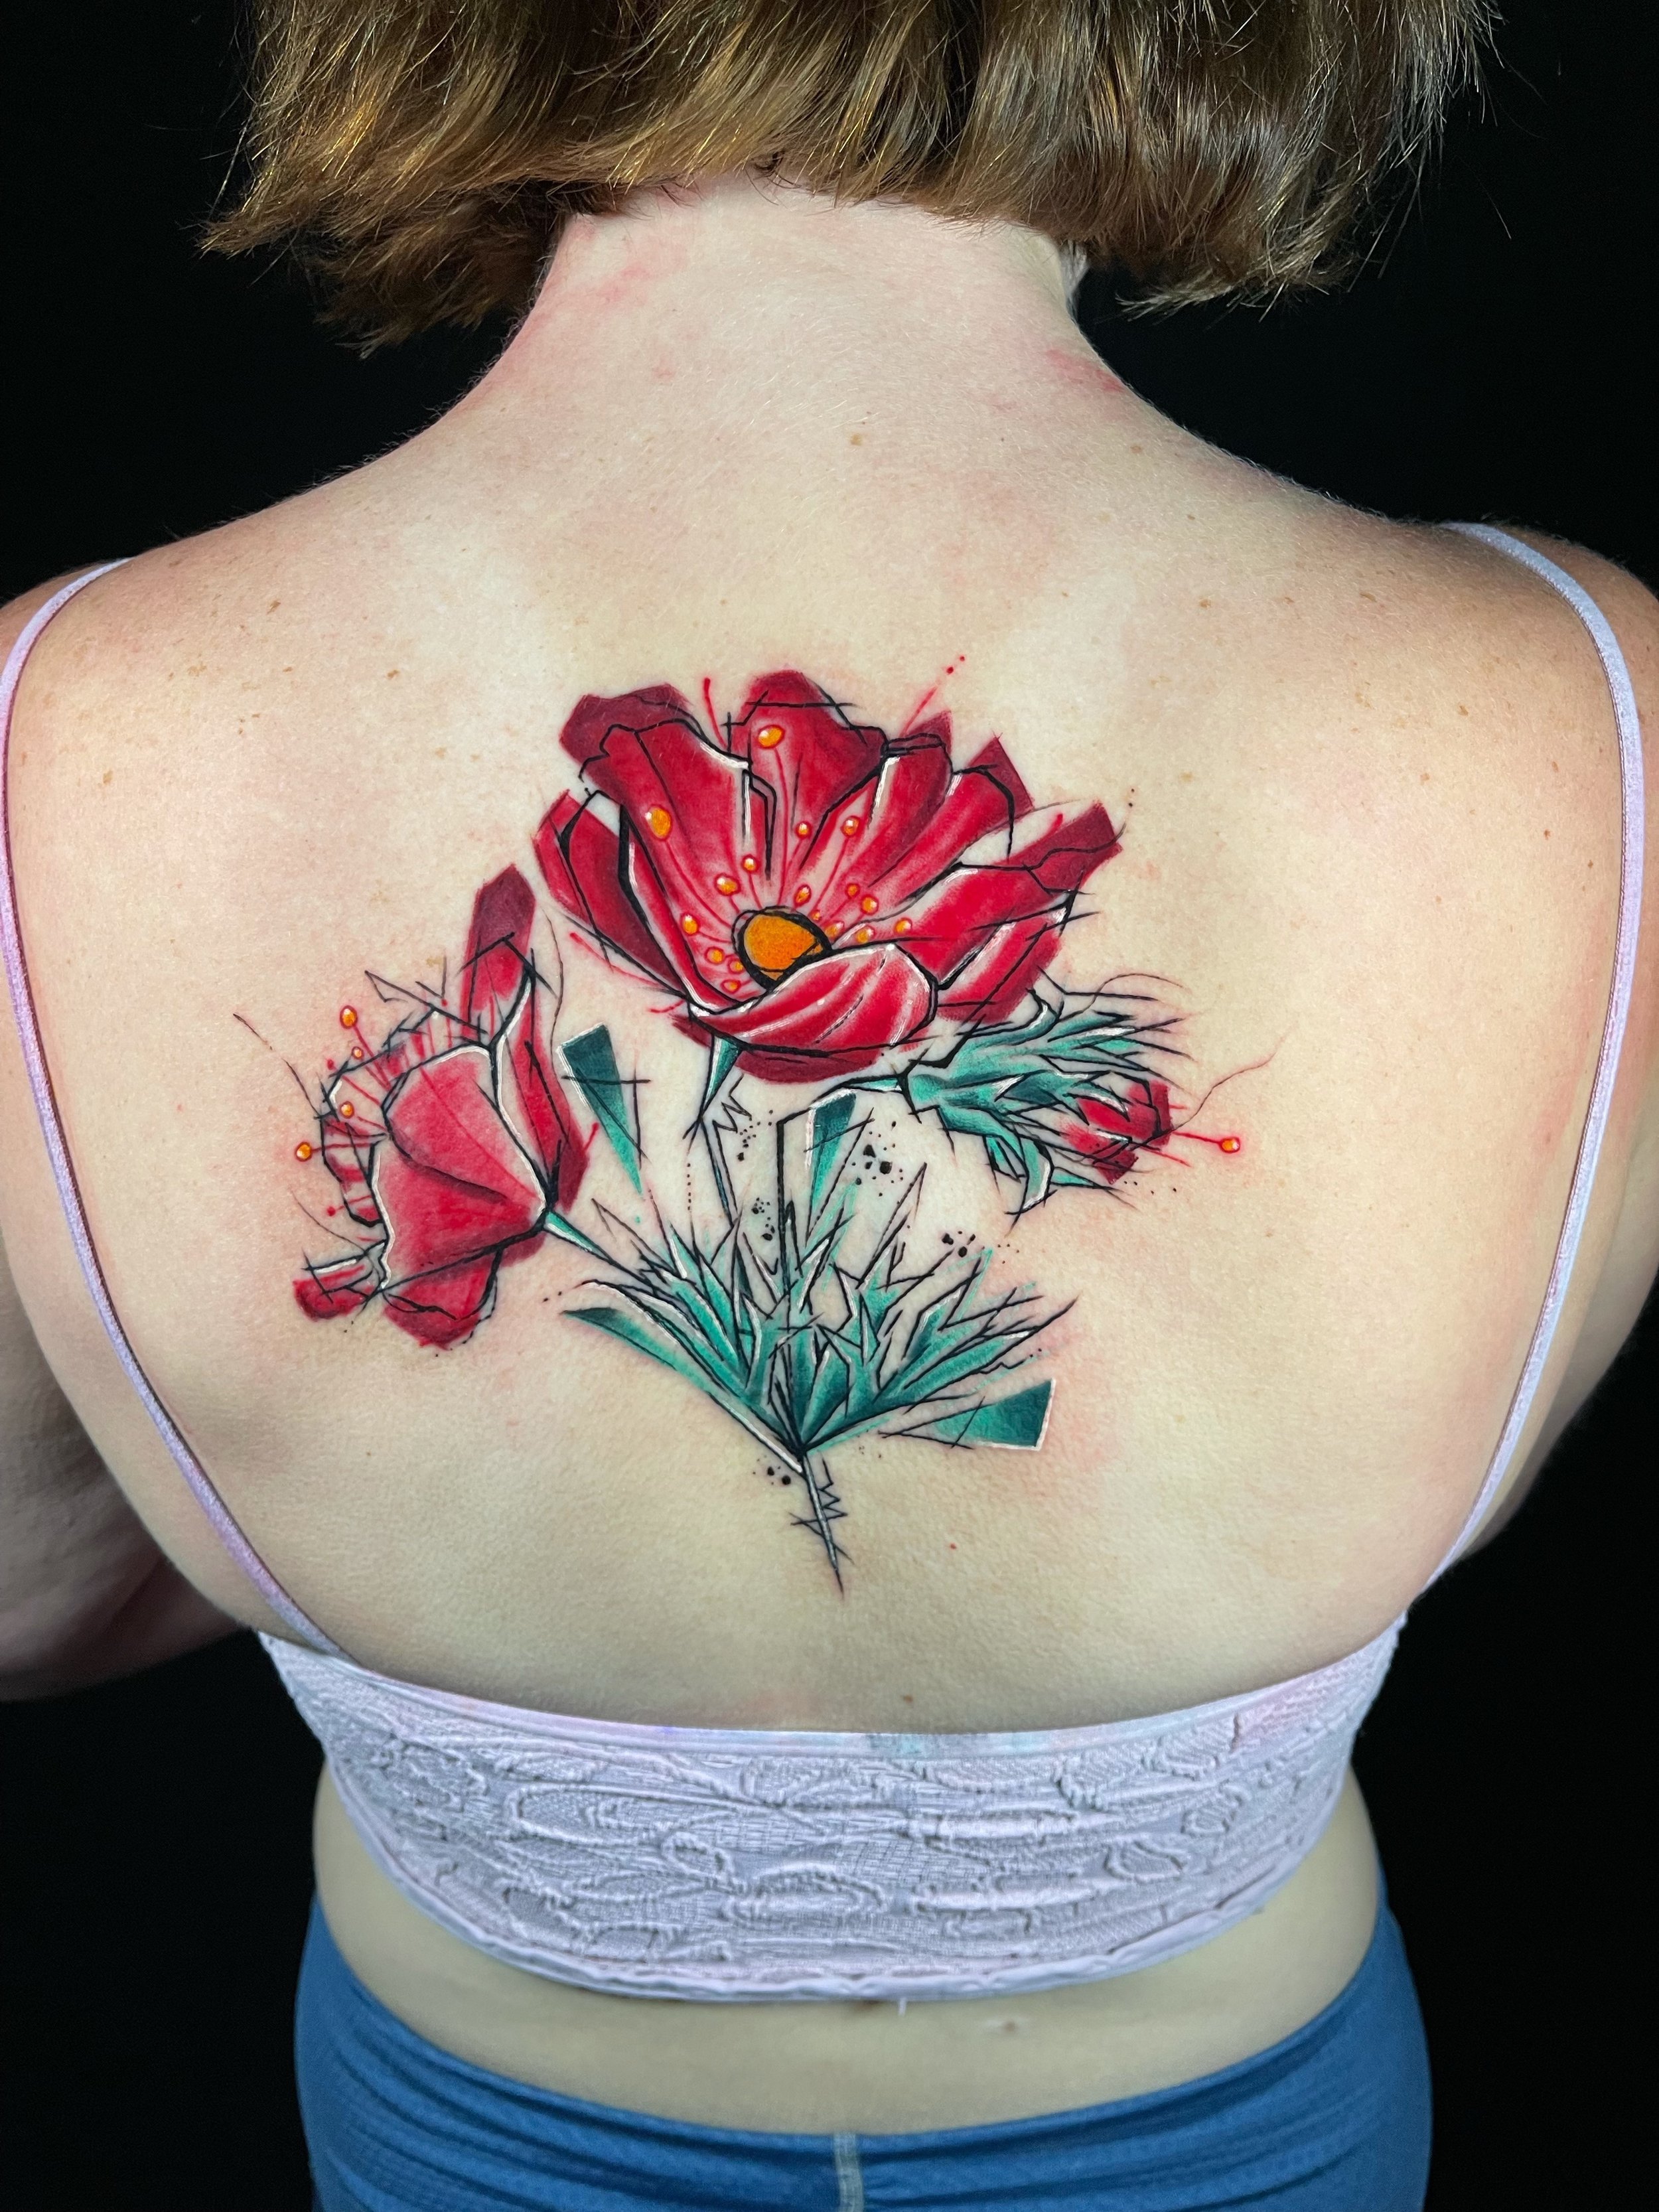 Why Is My Tattoo Fading? Causes & How To Prevent It